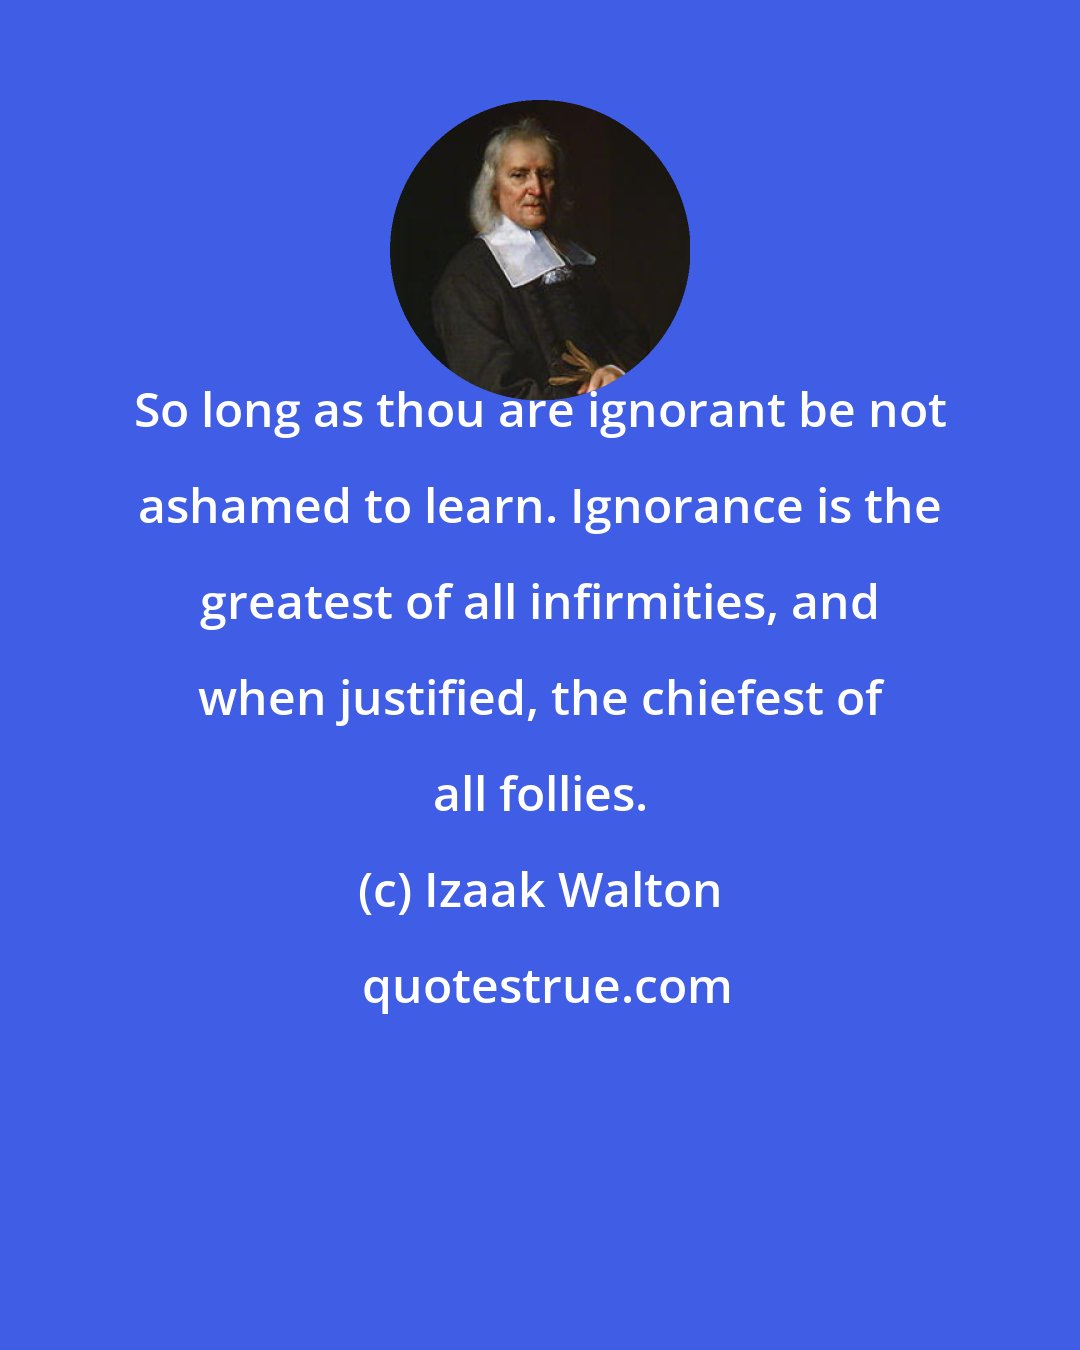 Izaak Walton: So long as thou are ignorant be not ashamed to learn. Ignorance is the greatest of all infirmities, and when justified, the chiefest of all follies.